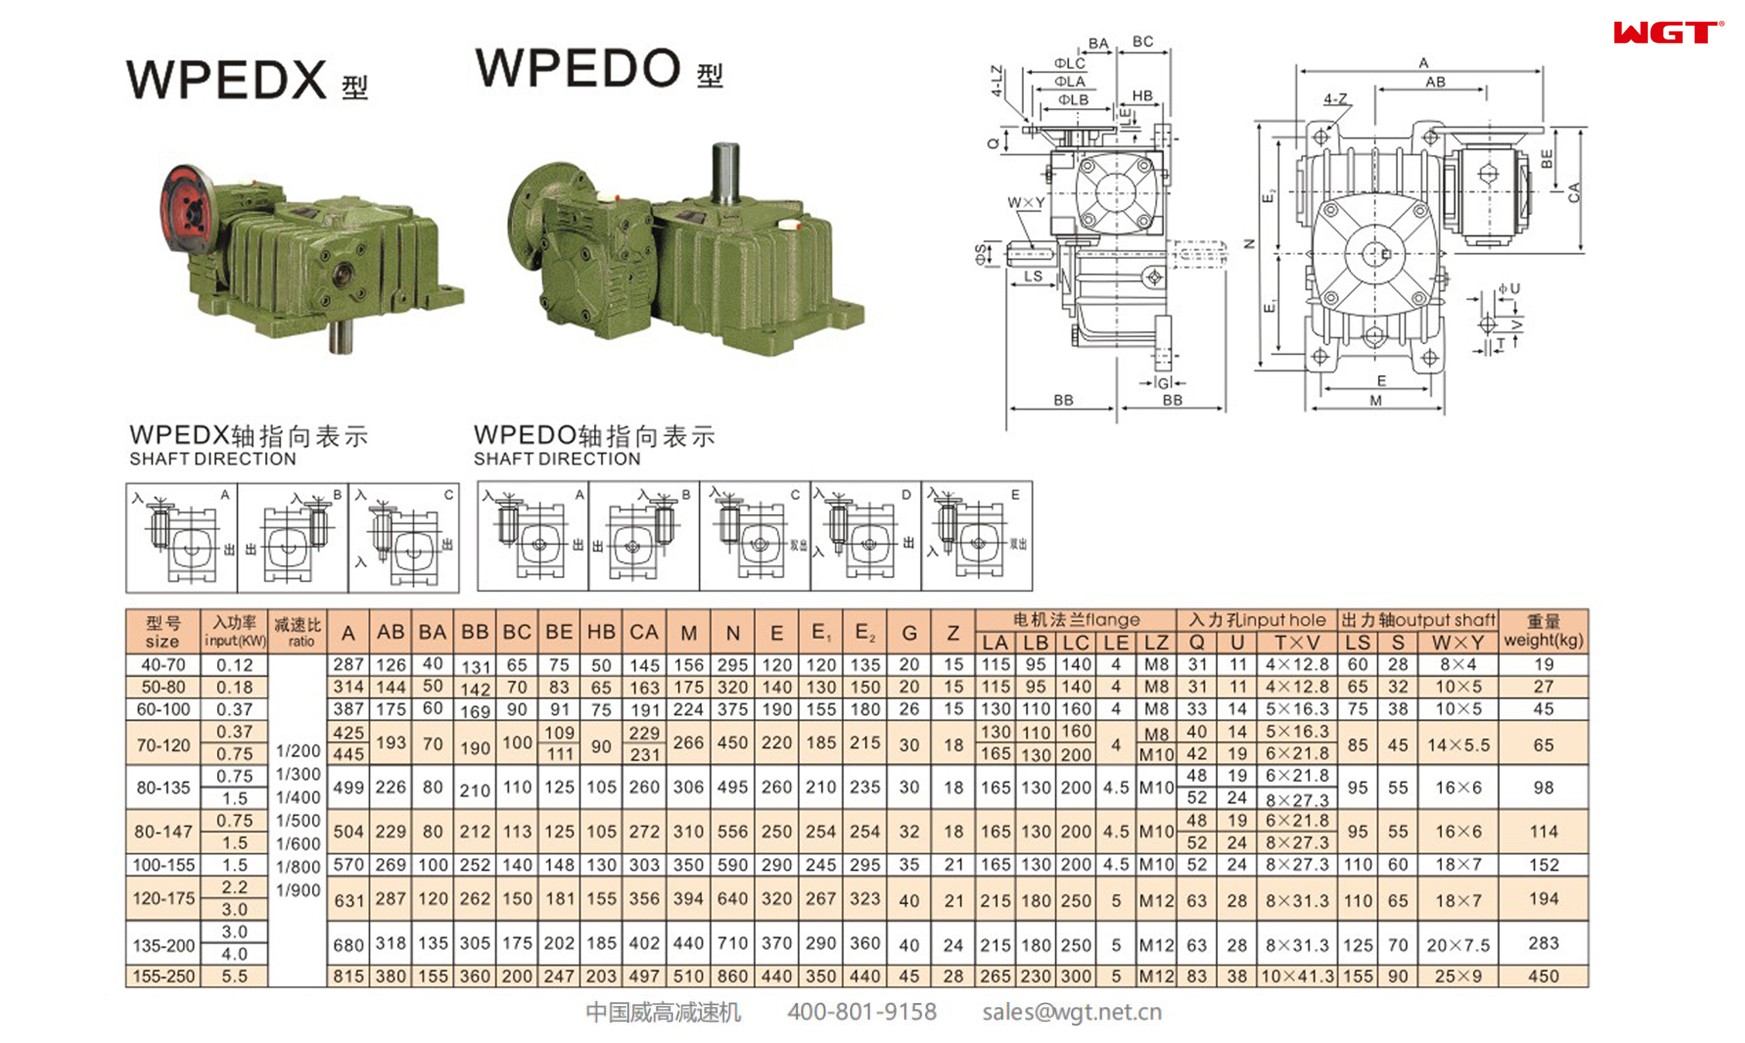 WPEDX80-135 worm gear reducer double speed reducer